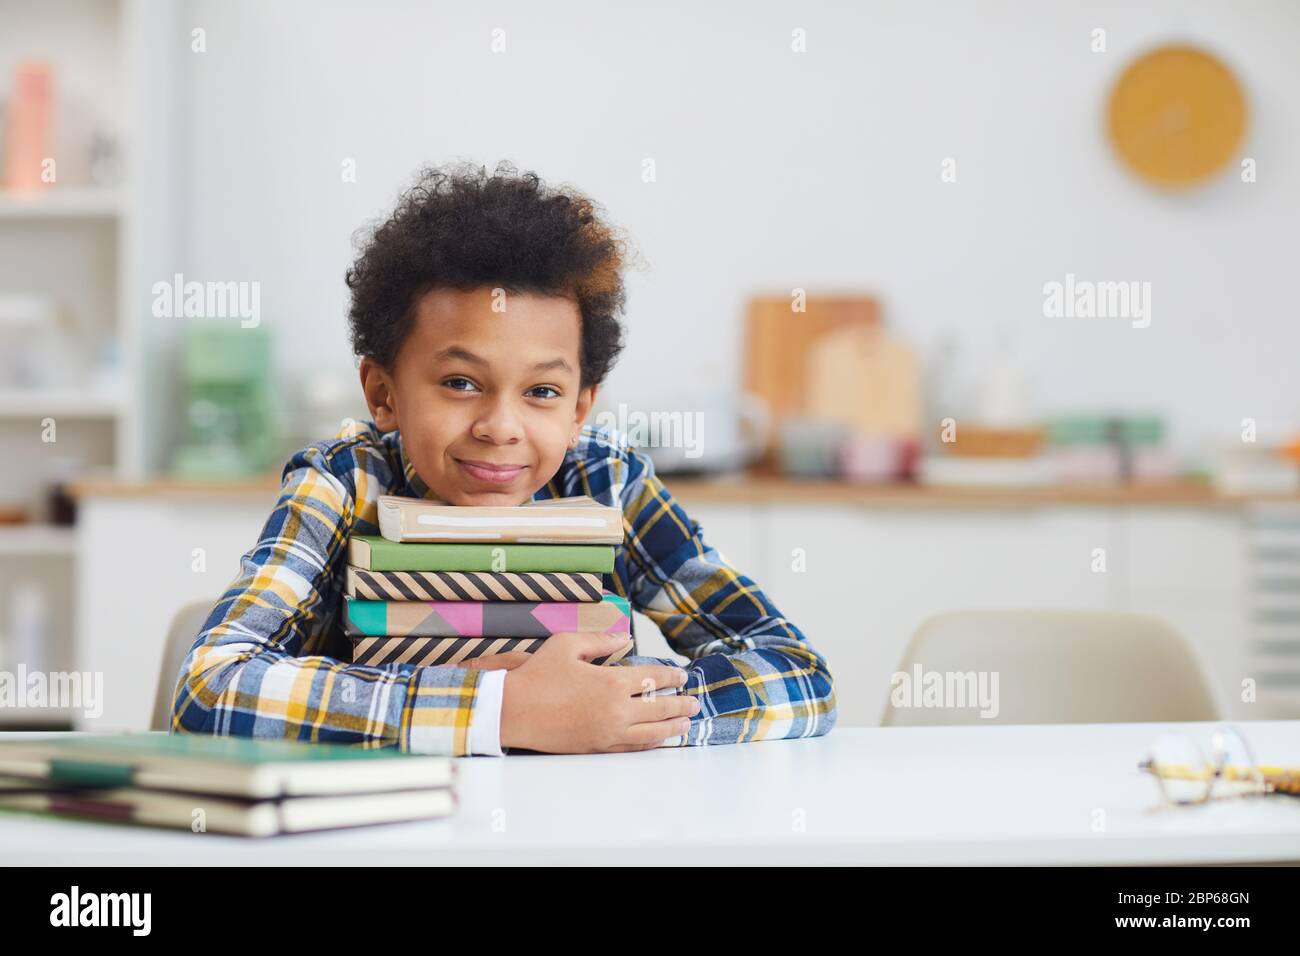 Portrait of cute African-American boy holding stack of books while sitting at desk at home and smiling at camera, copy space Stock Photo